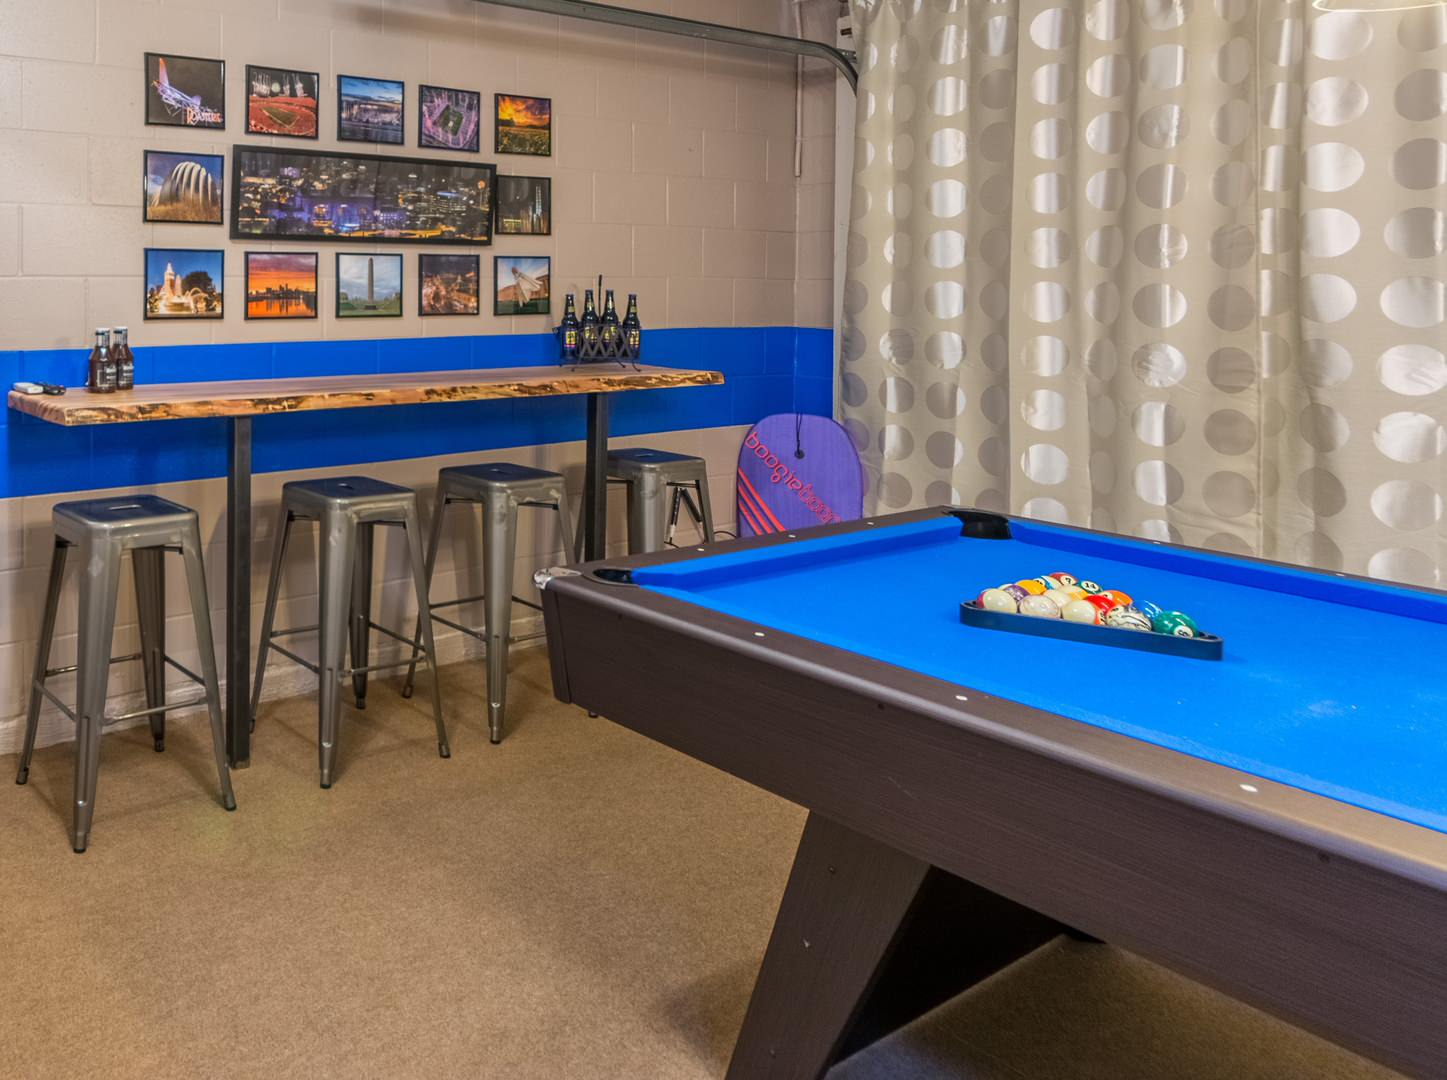 Vacation Home Game Room Garage   Traditional   Garage   Other   by ...